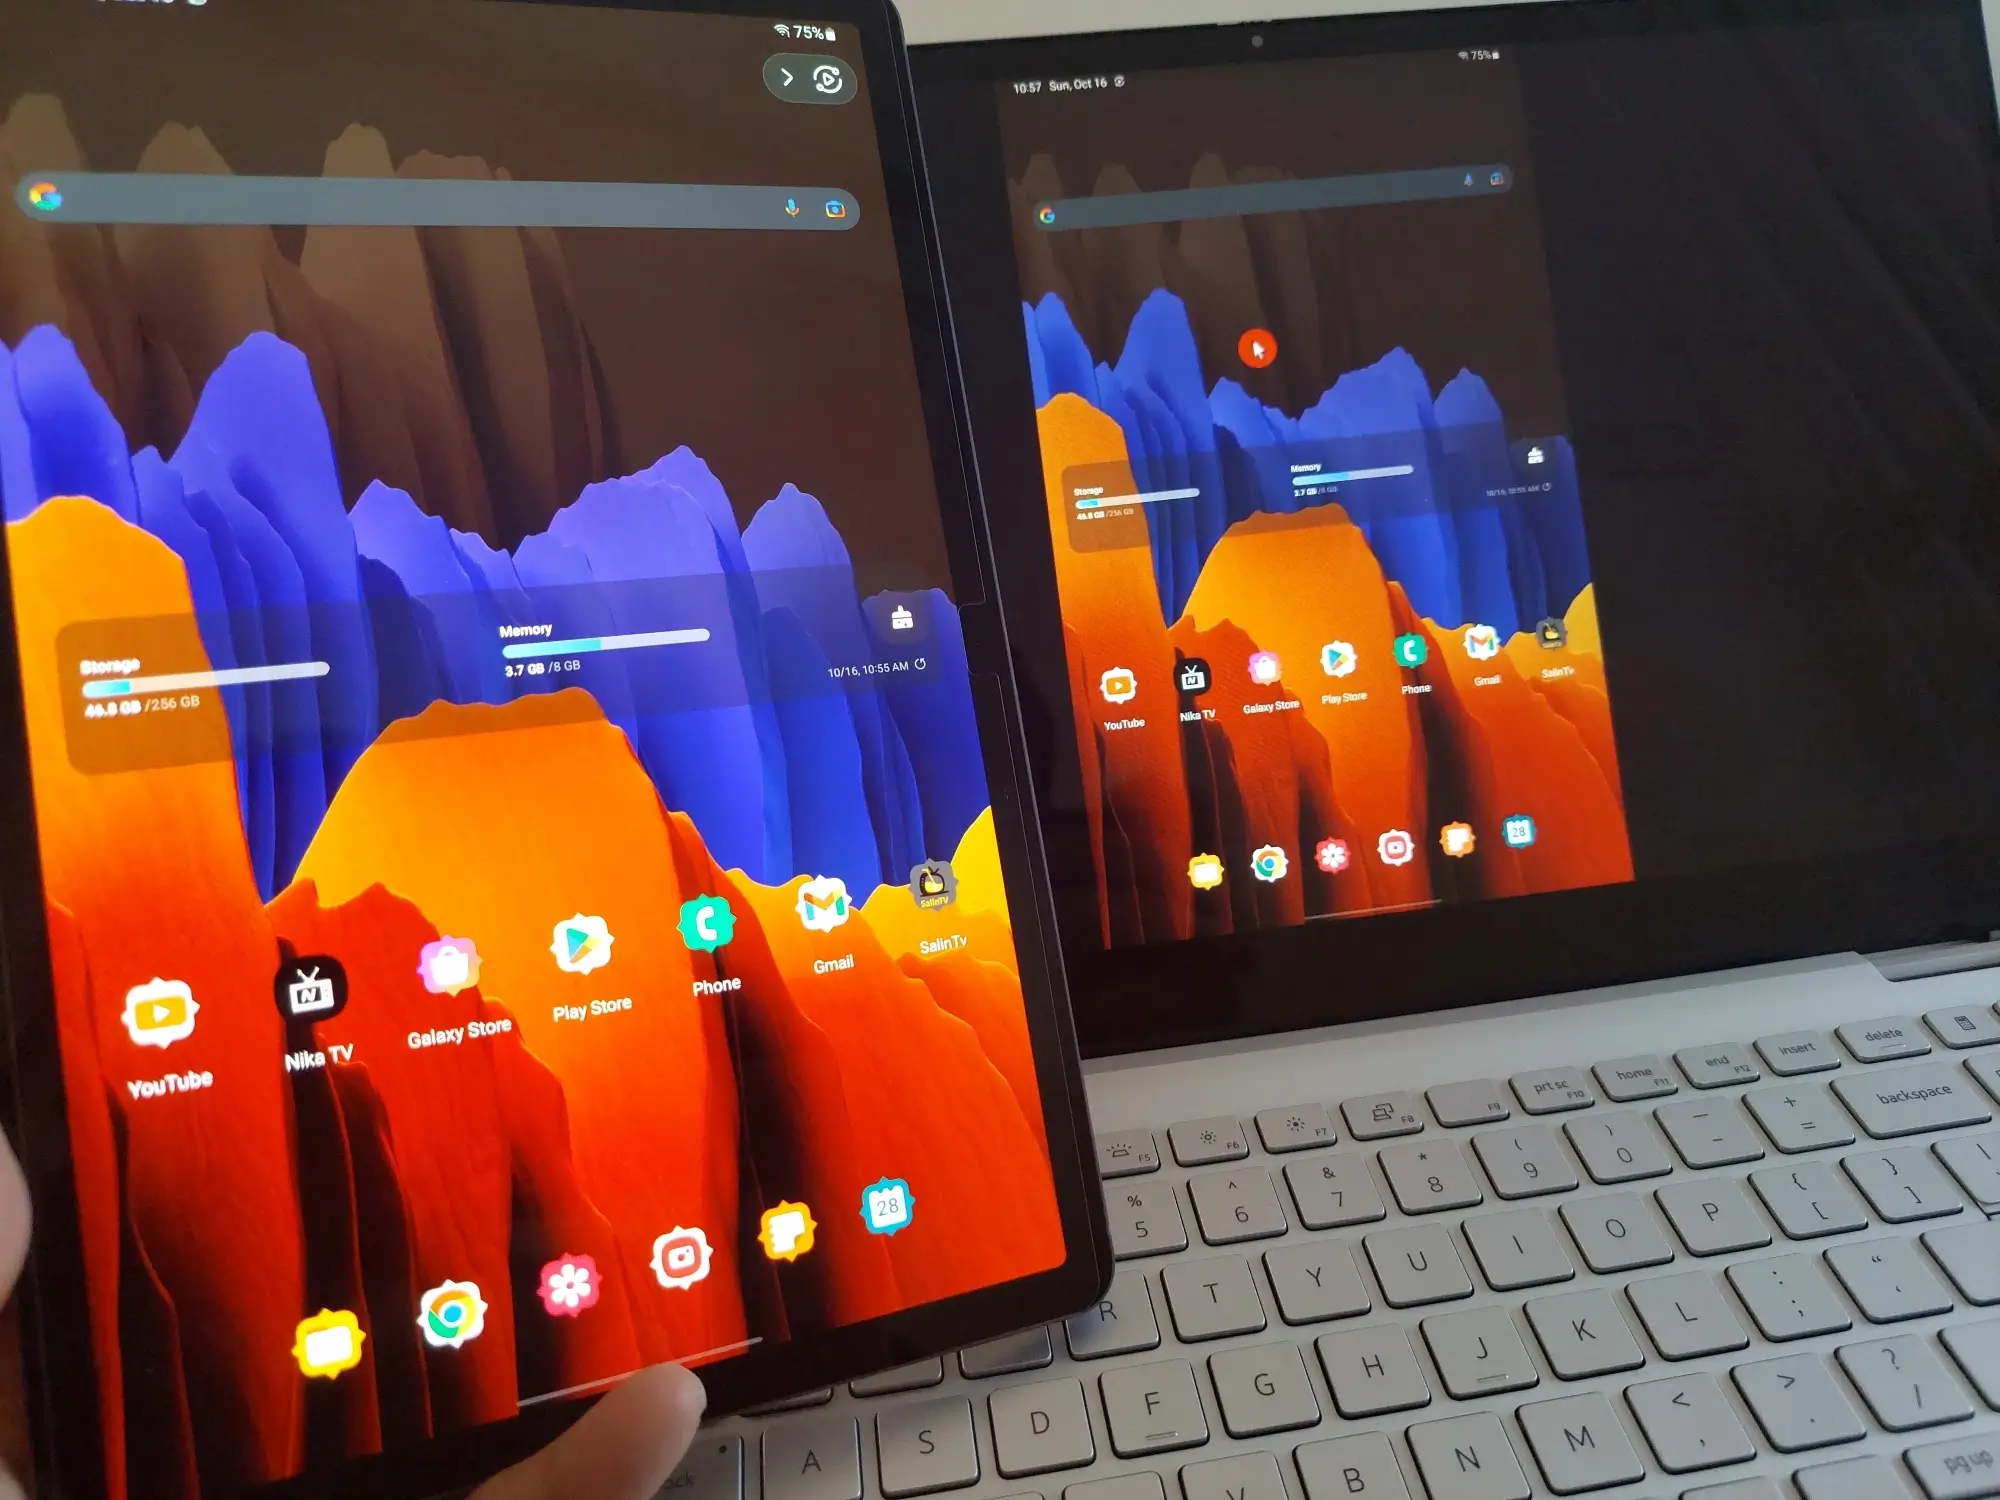 How to Mirror Samsung Tablet to a Computer in Windows 11